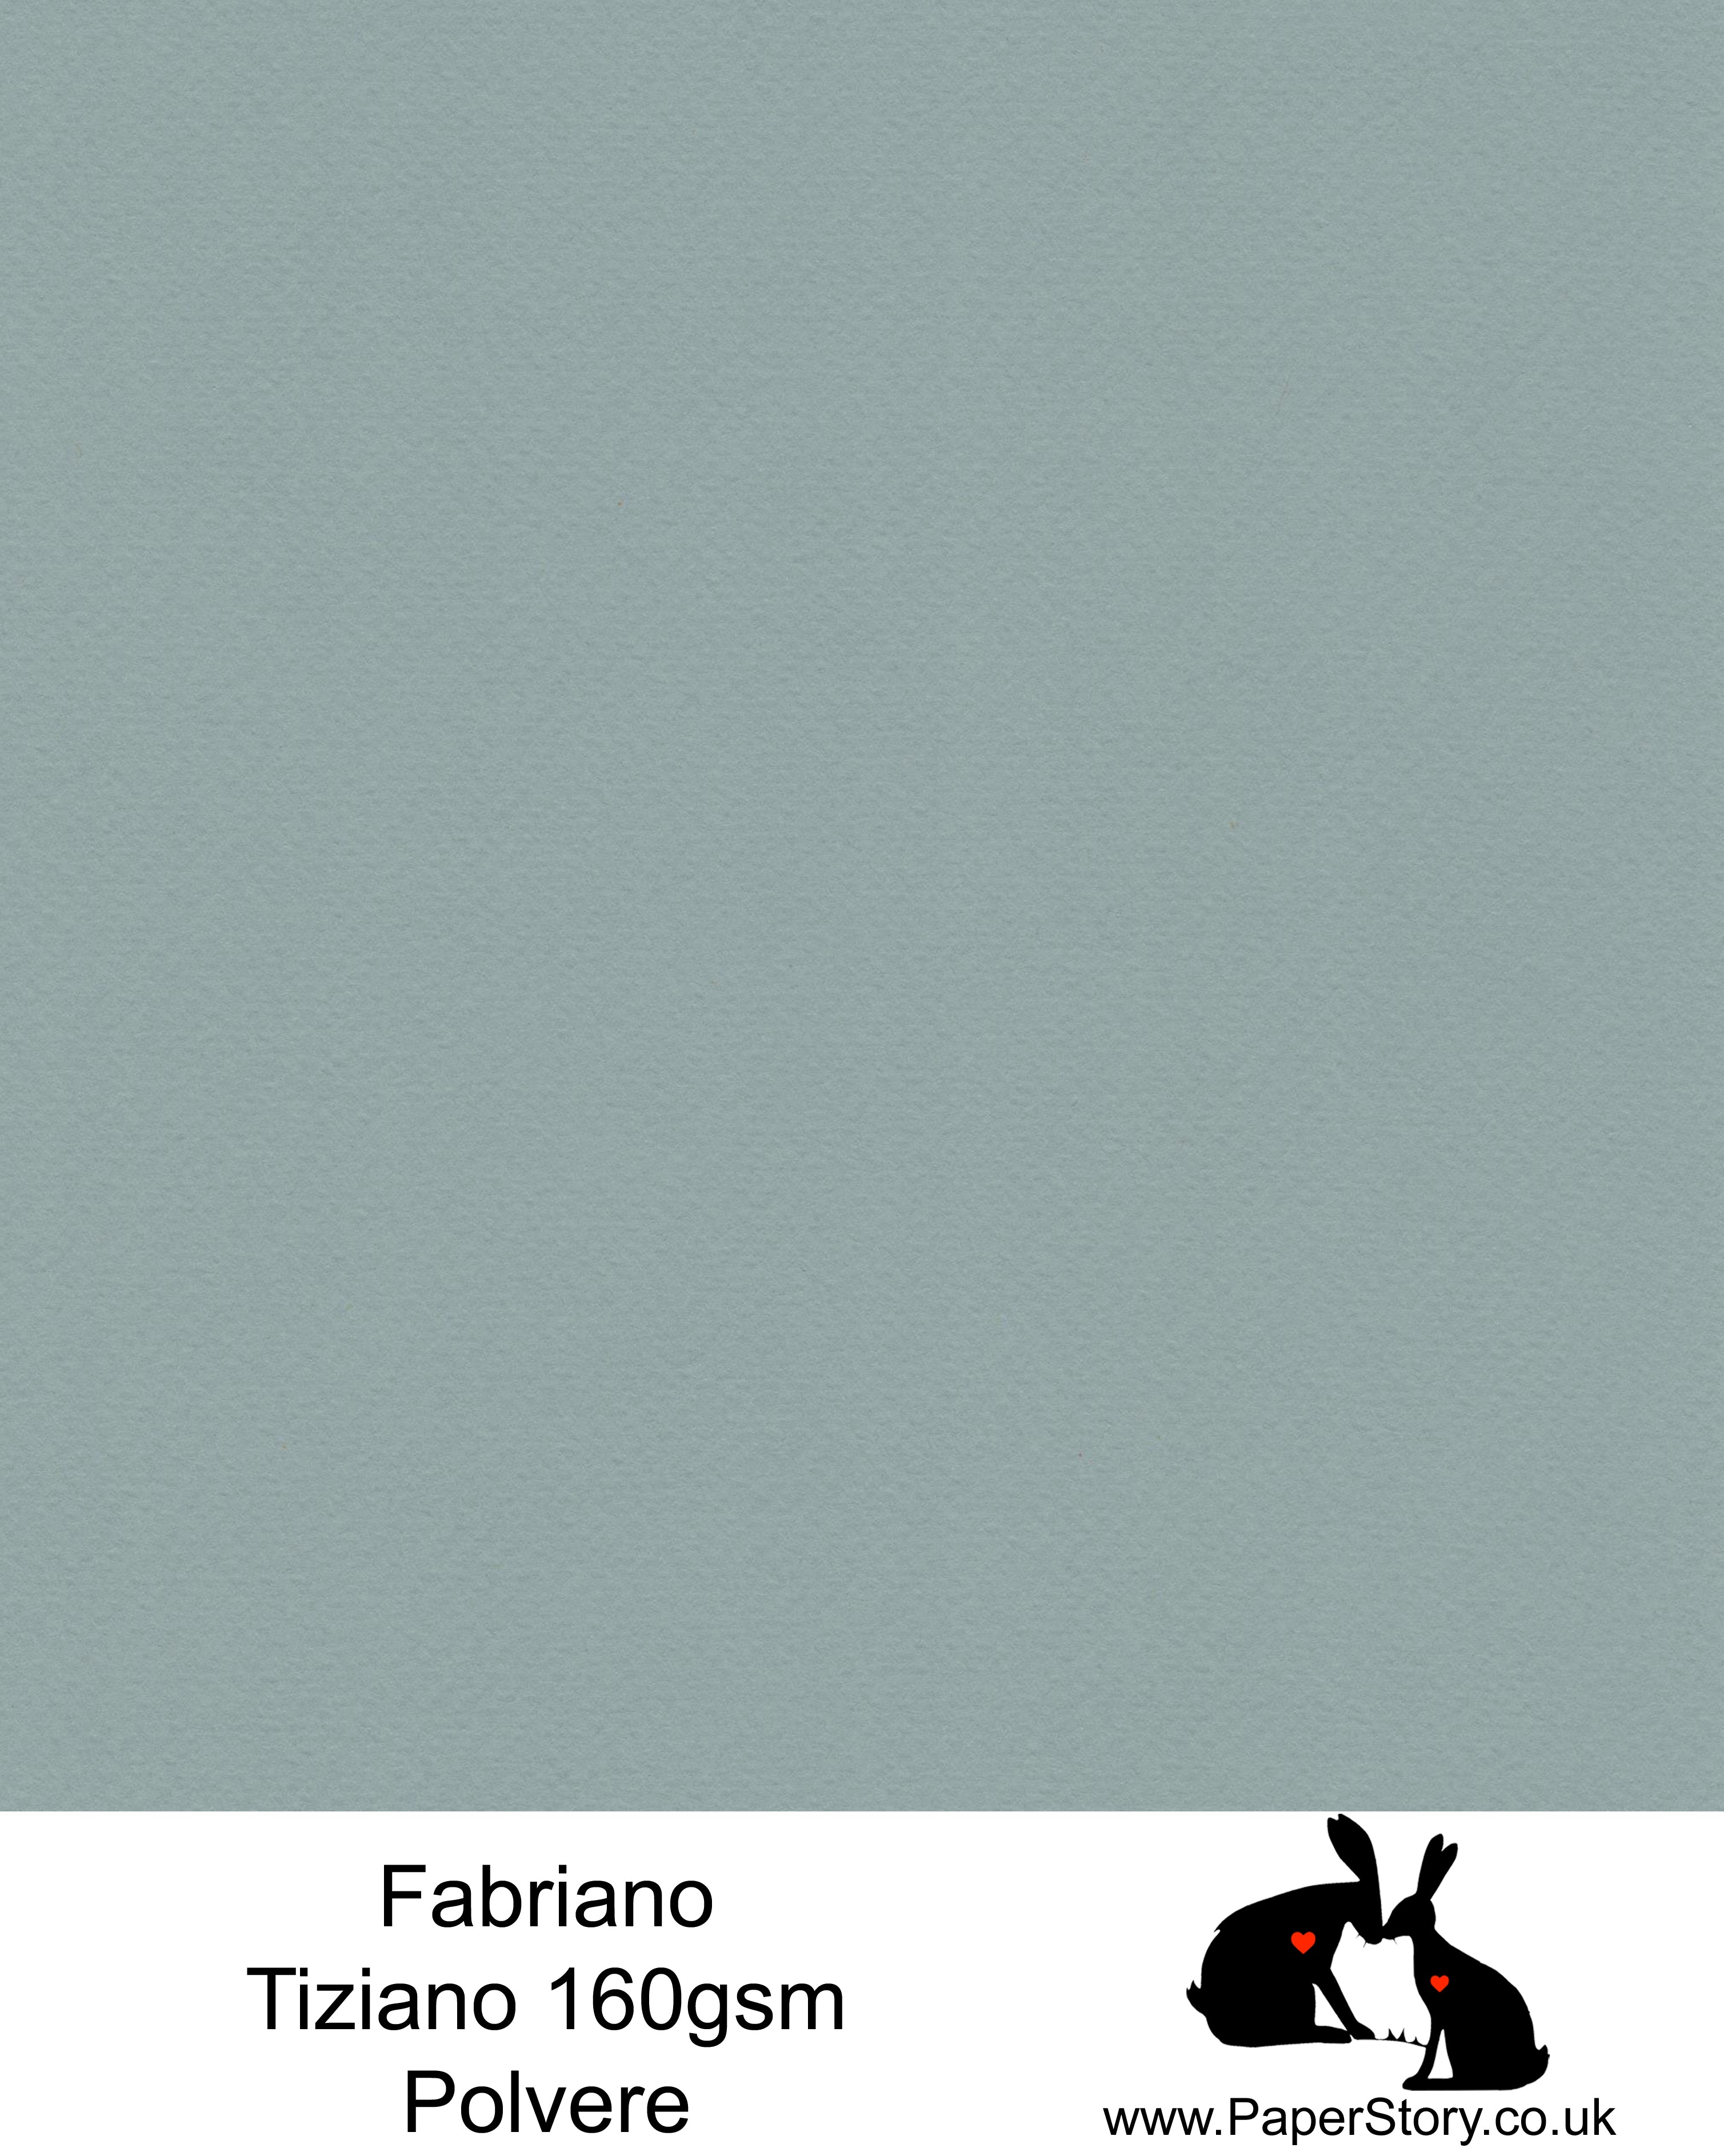 High quality paper from Italy, Polvere, blue with cool hint of grey Fabriano Tiziano is 160 gsm, Tiziano has a high cotton content, a textured naturally sized surface. This paper is acid free to guarantee long permanence in time, pH neutral. It has highly lightfast colours, an excellent surface making and sizing which make this paper particularly suitable for papercutting,